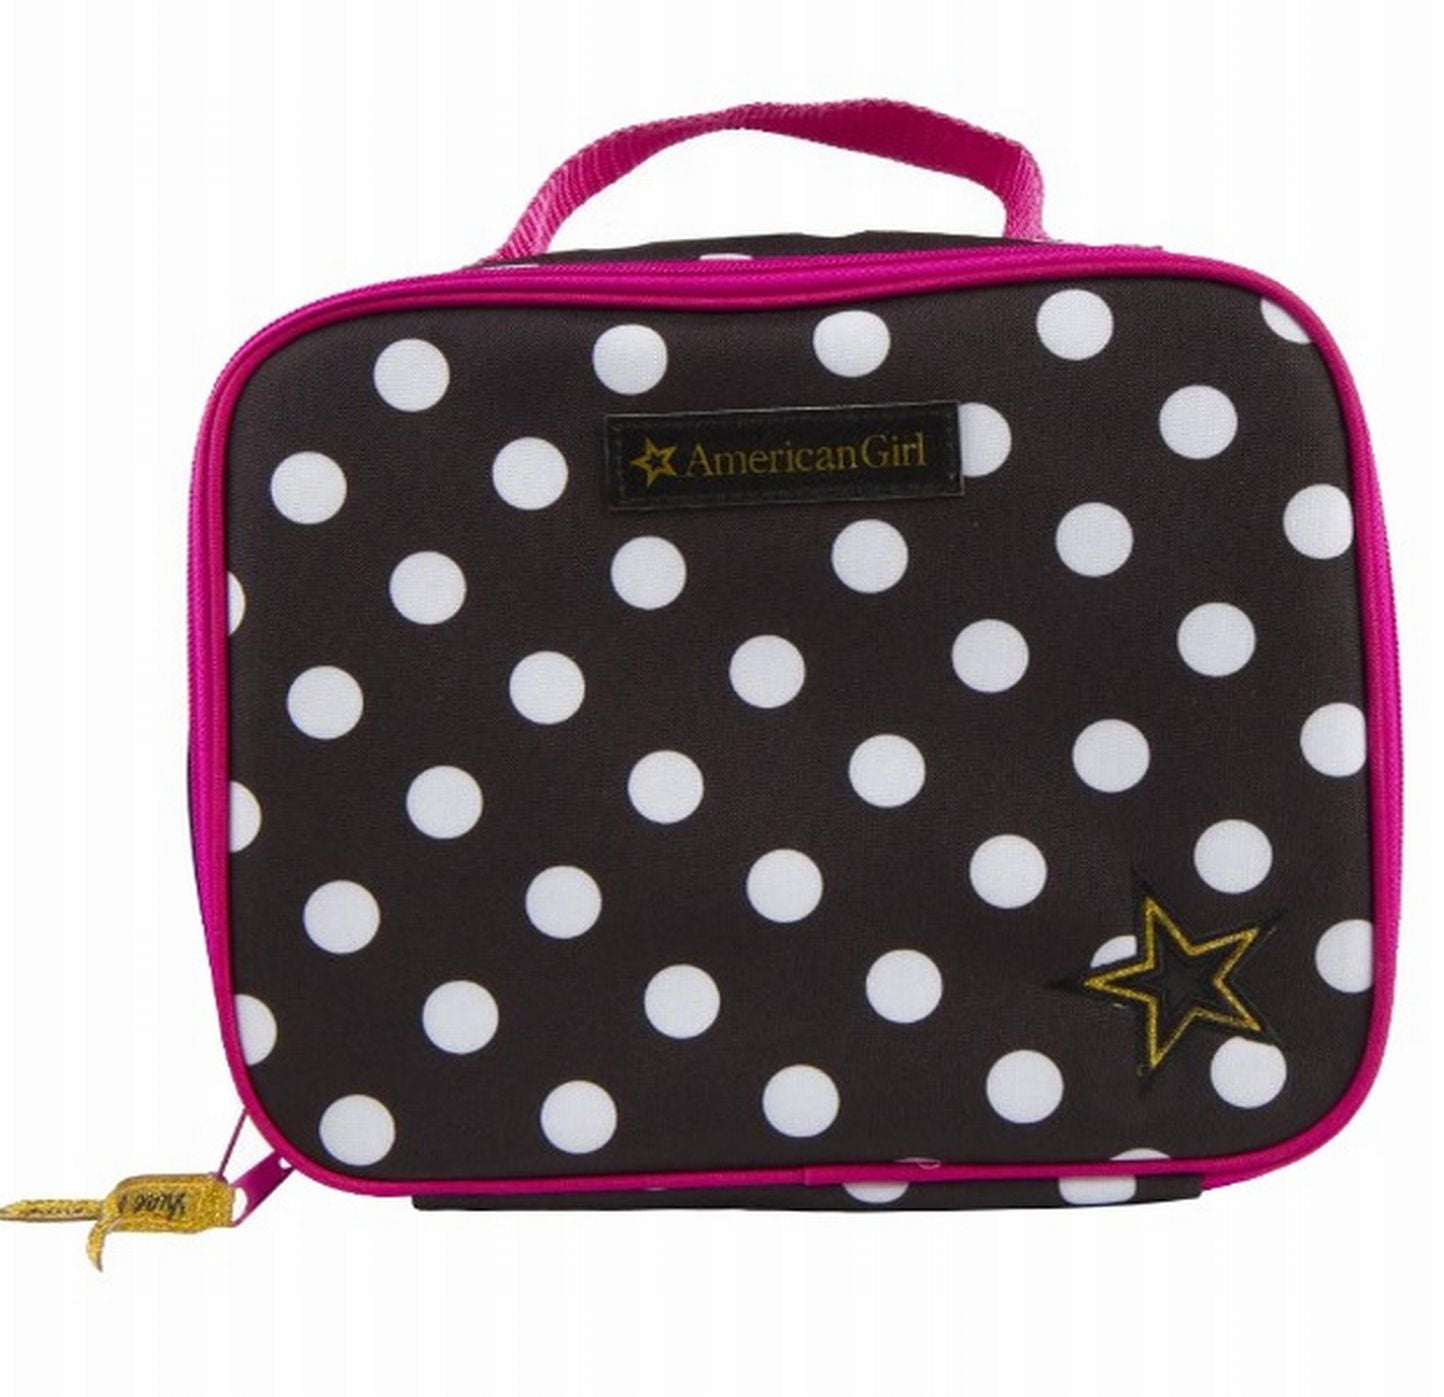 Cute Polka Dots Lunch Bag for Women Insulated Lunch Tote Bag for Working Waterproof Girls School Lunch Box Red